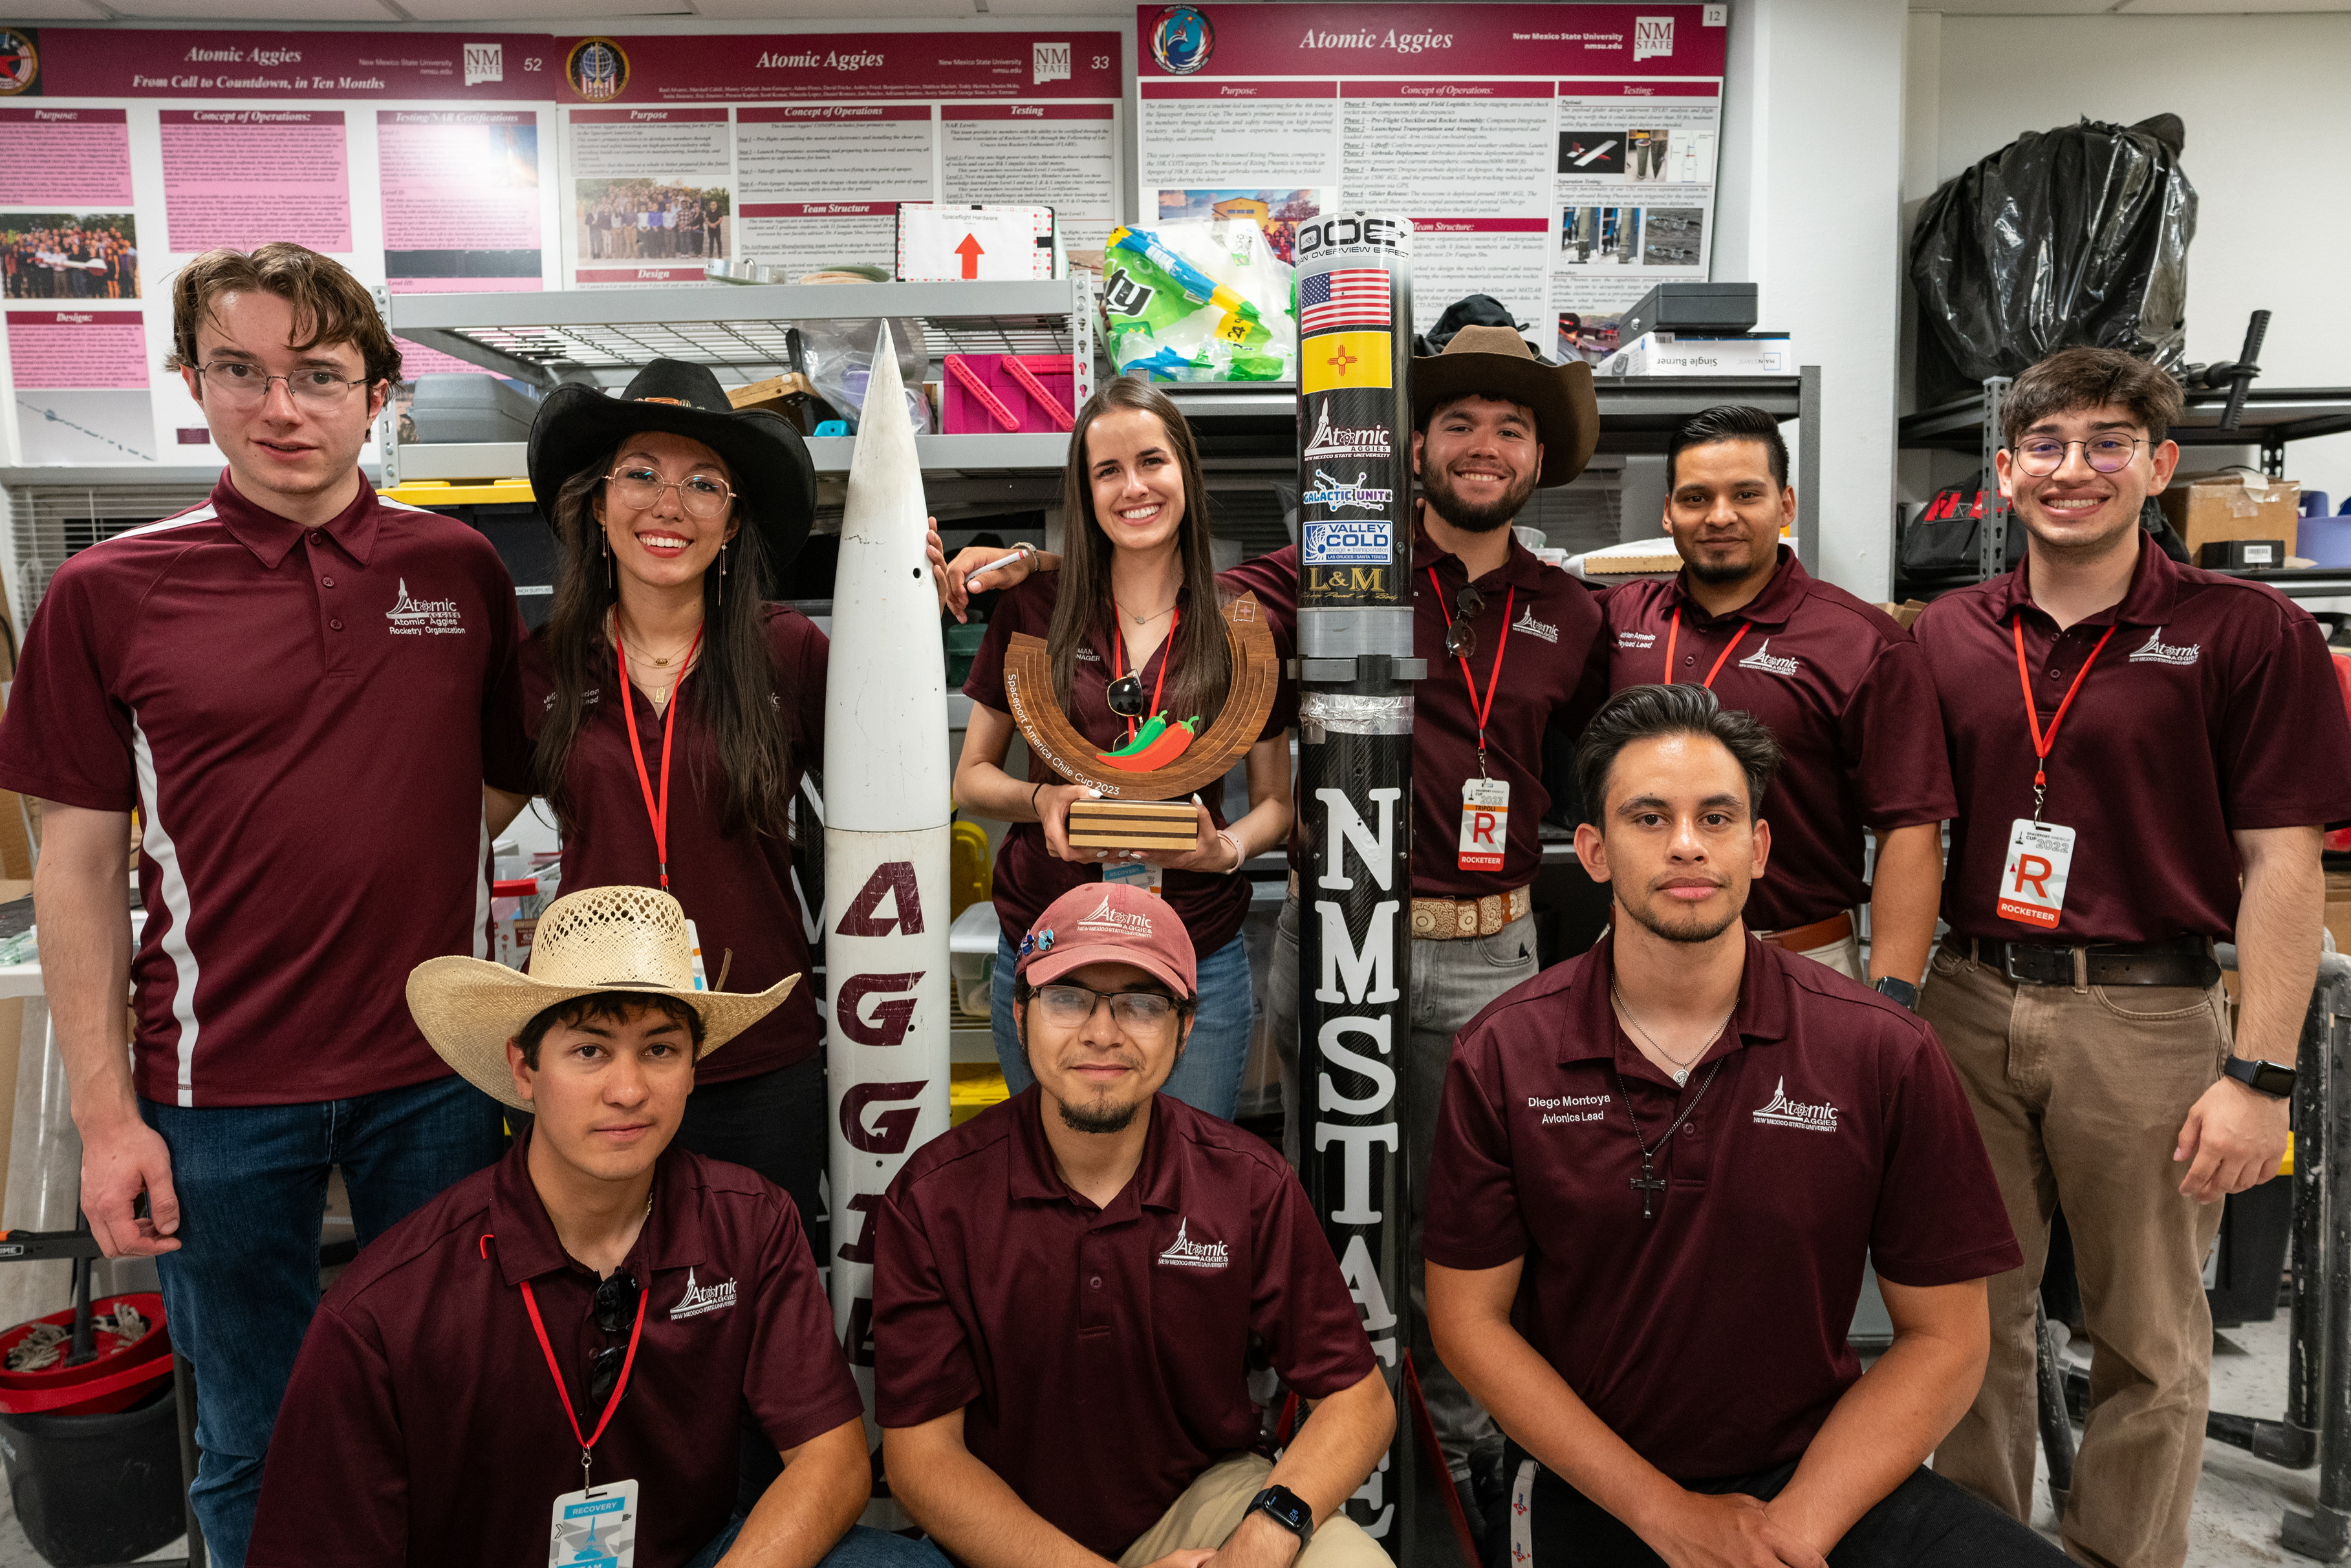 Atomic Aggies team photo standing next to competition rocket and chilie cup